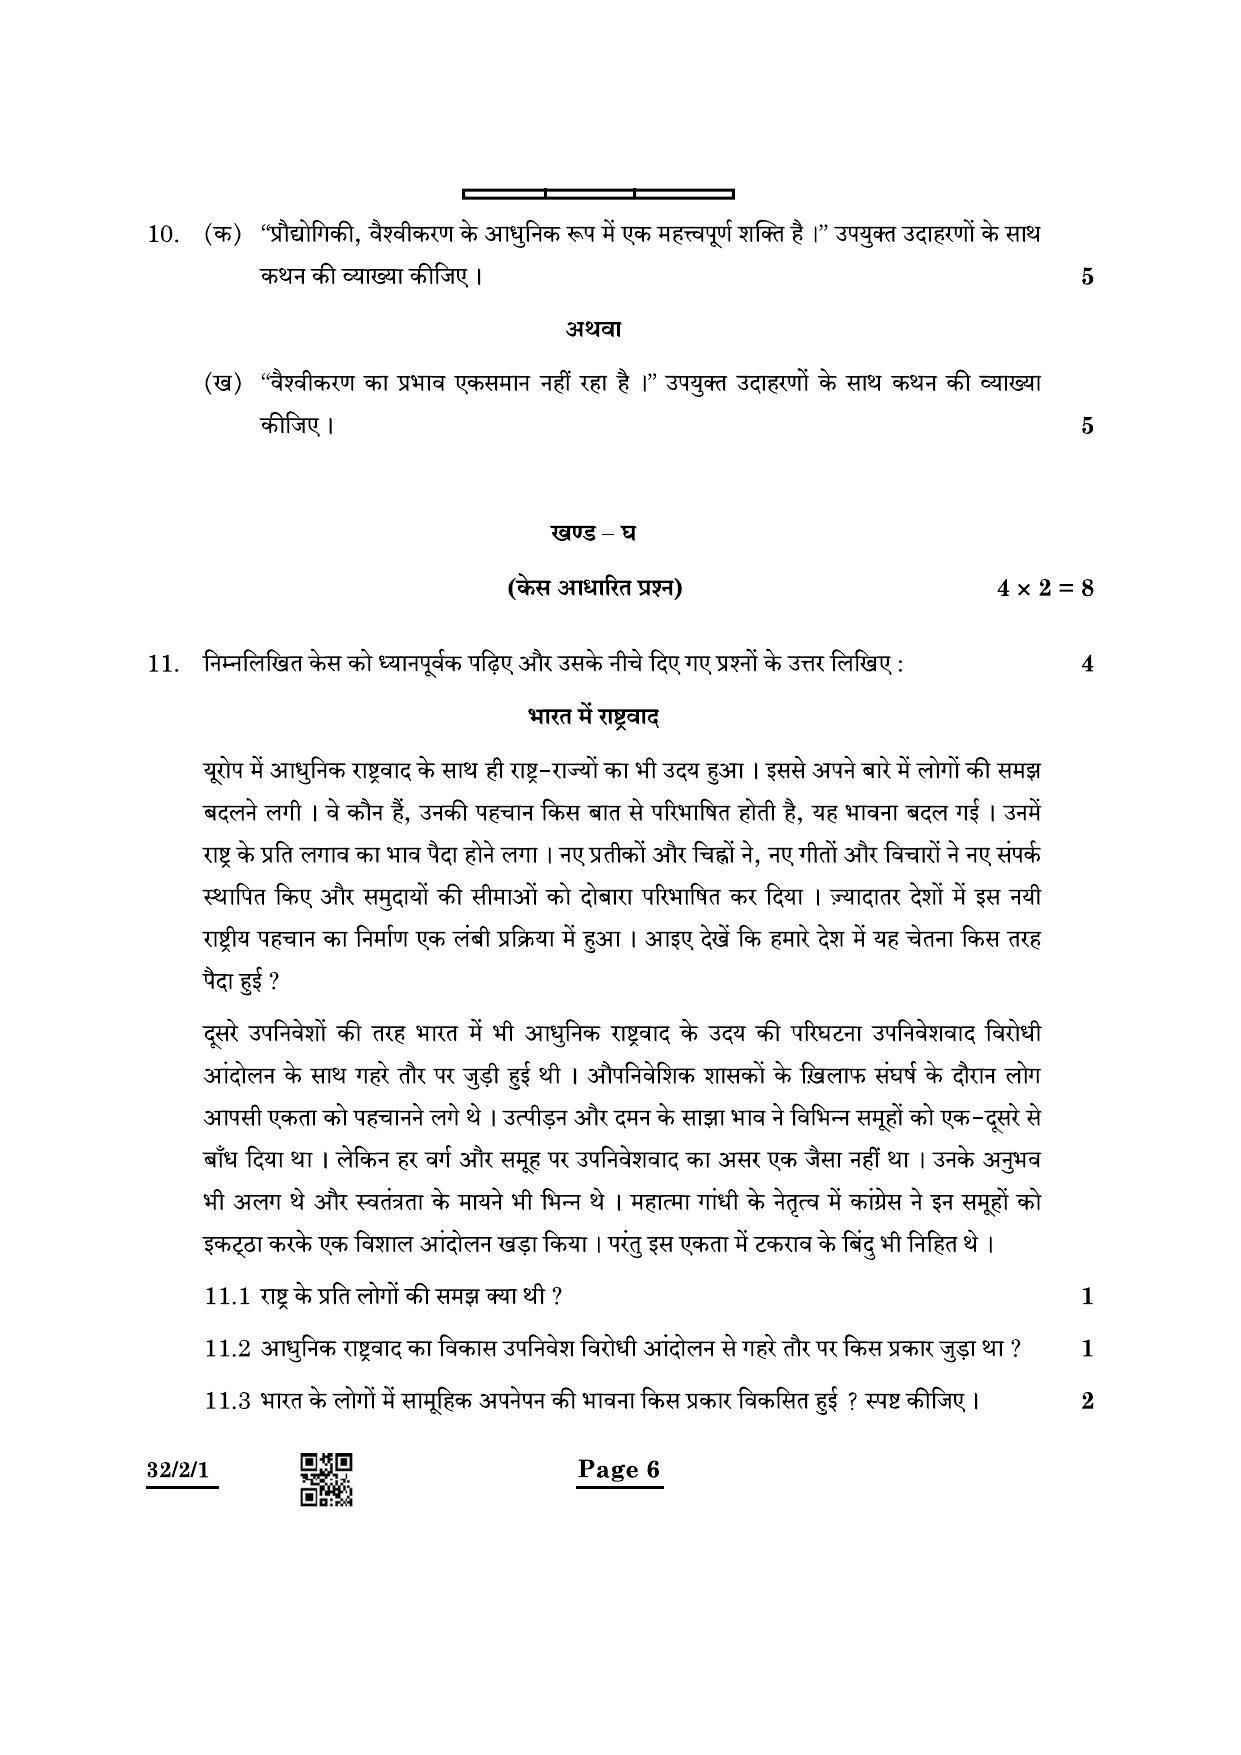 CBSE Class 10 32-2-1 Social Science 2022 Question Paper - Page 6